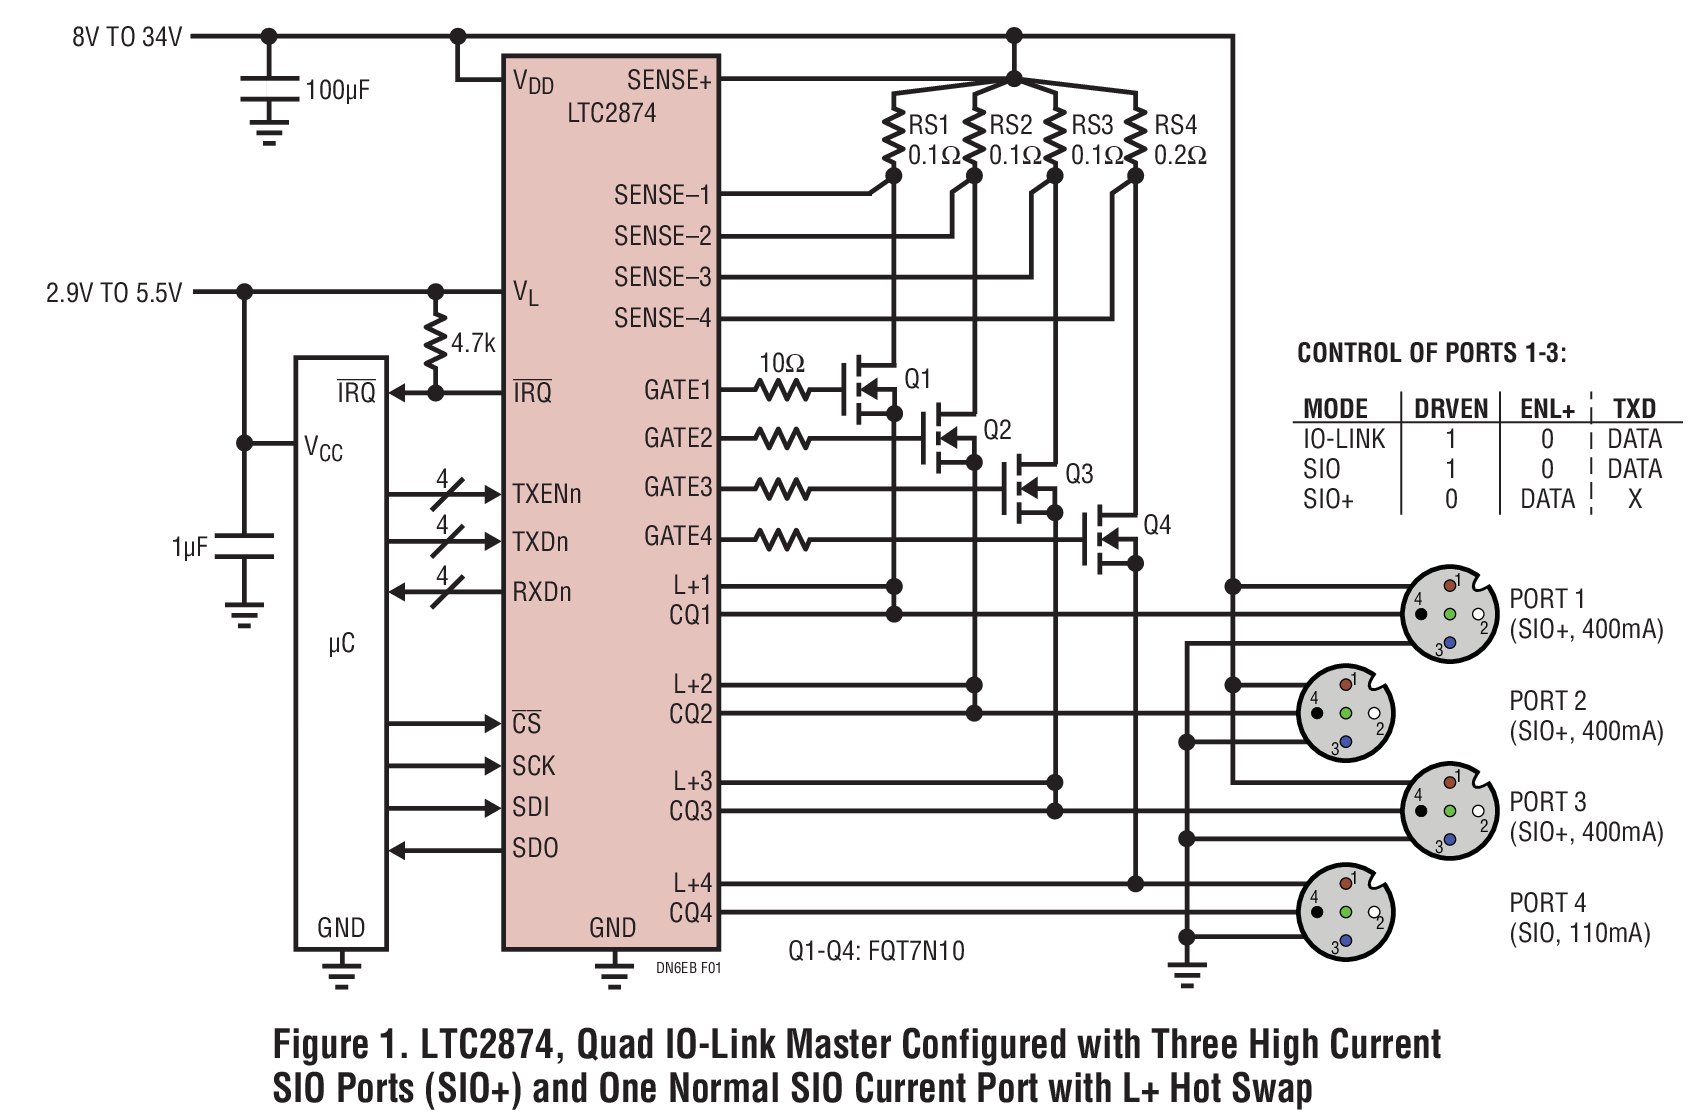 Figure 1. LTC2874, Quad IO-Link Master Configured with Three High Current SIO Ports (SIO+) and One Normal SIO Current Port with L+ Hot Swap